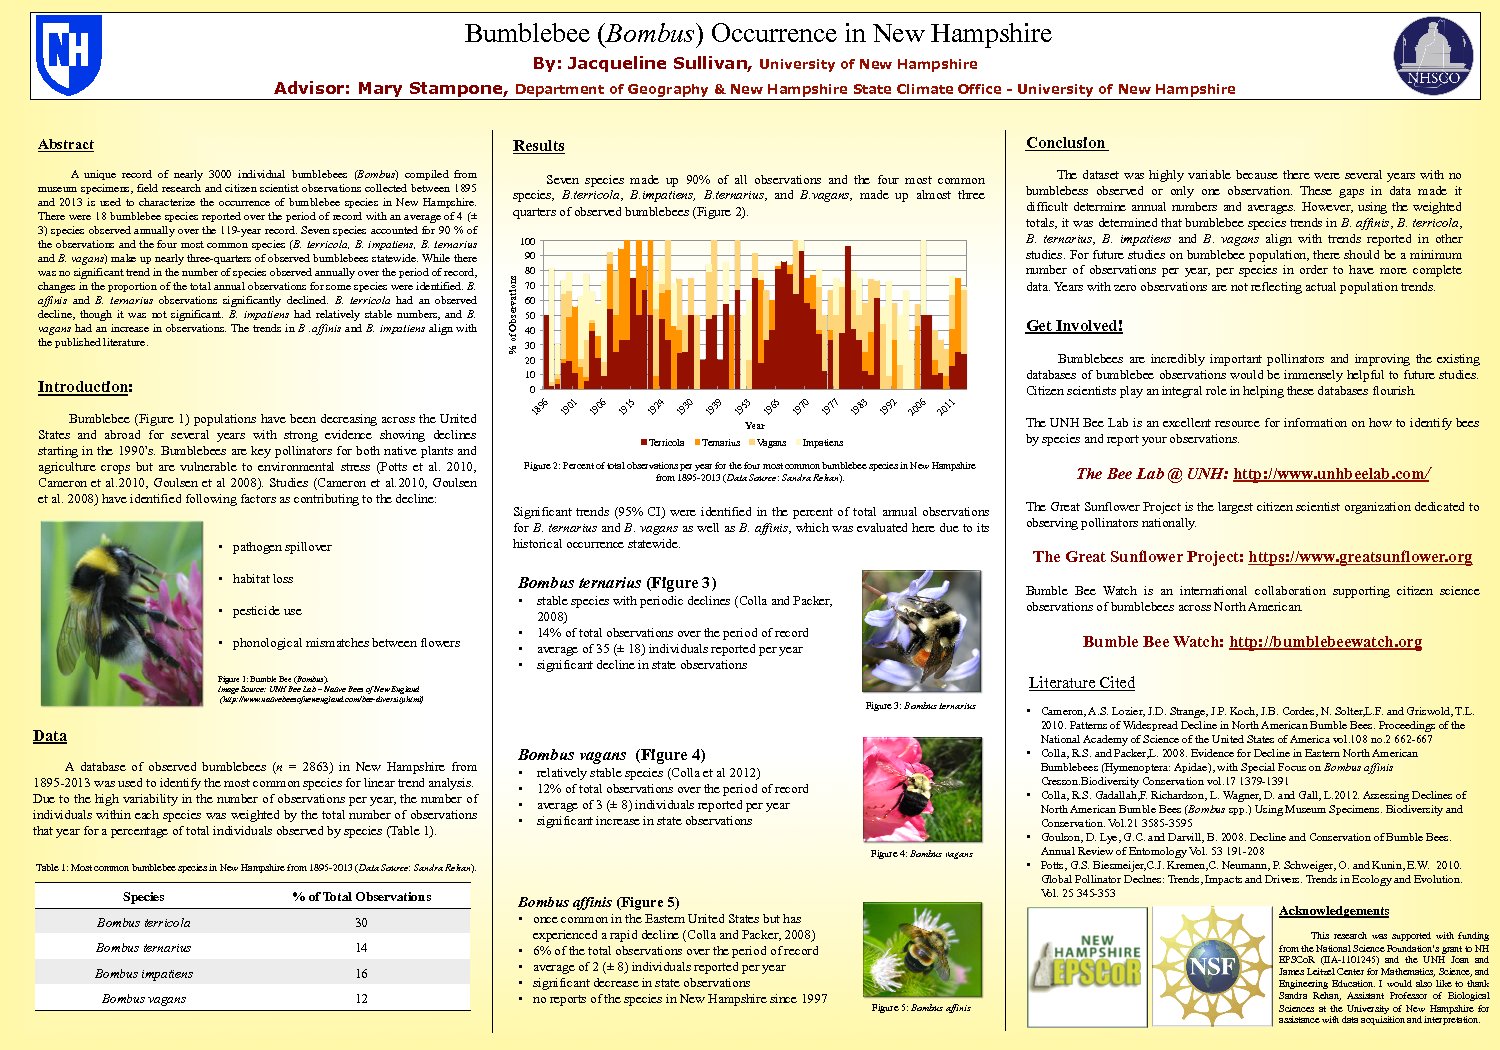 Bumblebee (Bombus) Occurrence In New Hampshire by mdb48